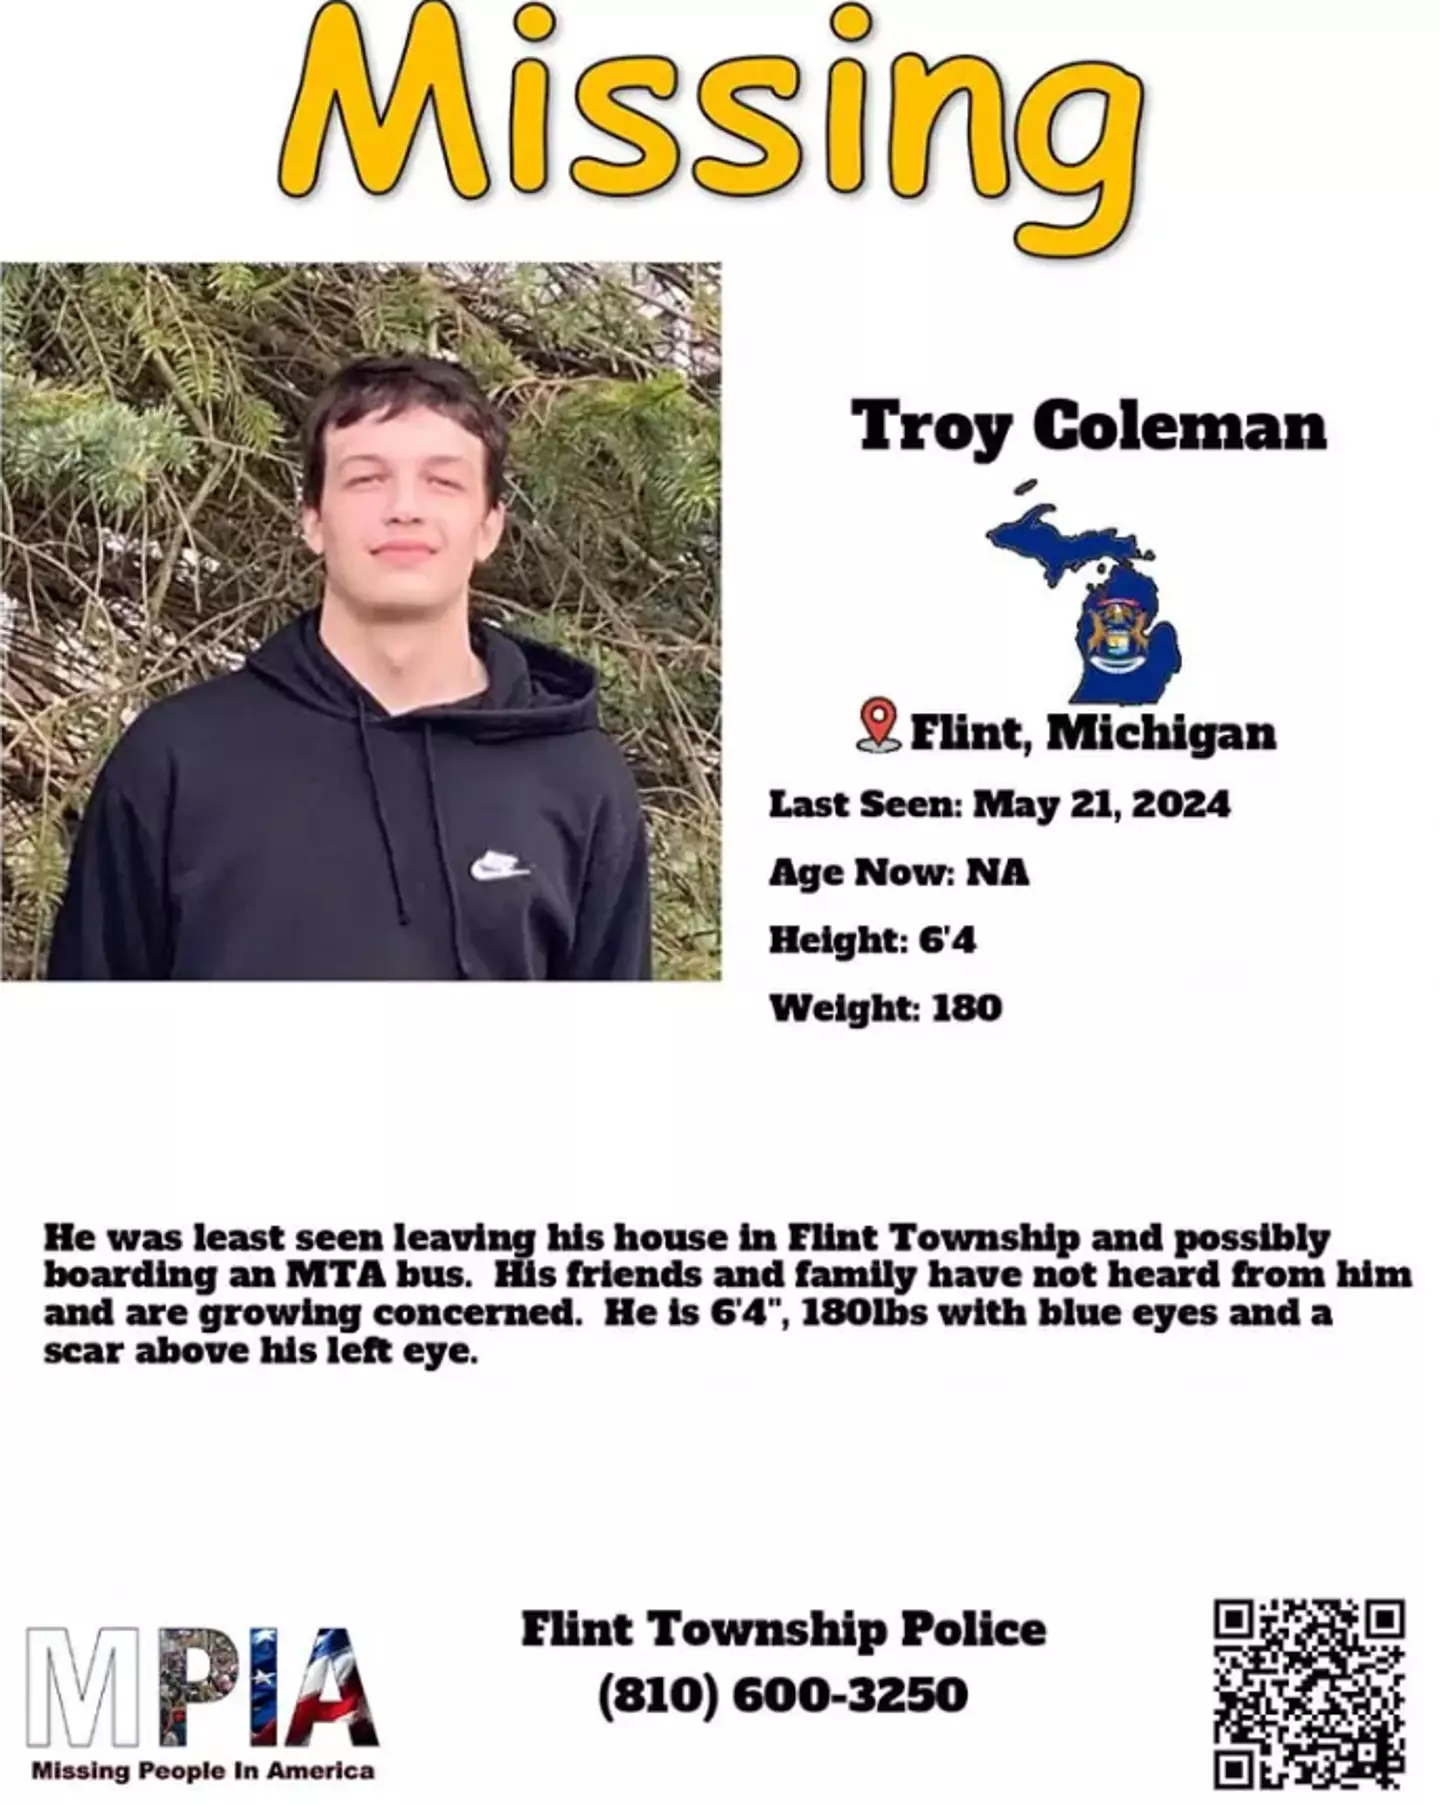 Troy Coleman missing poster (Missing and exploited children) 